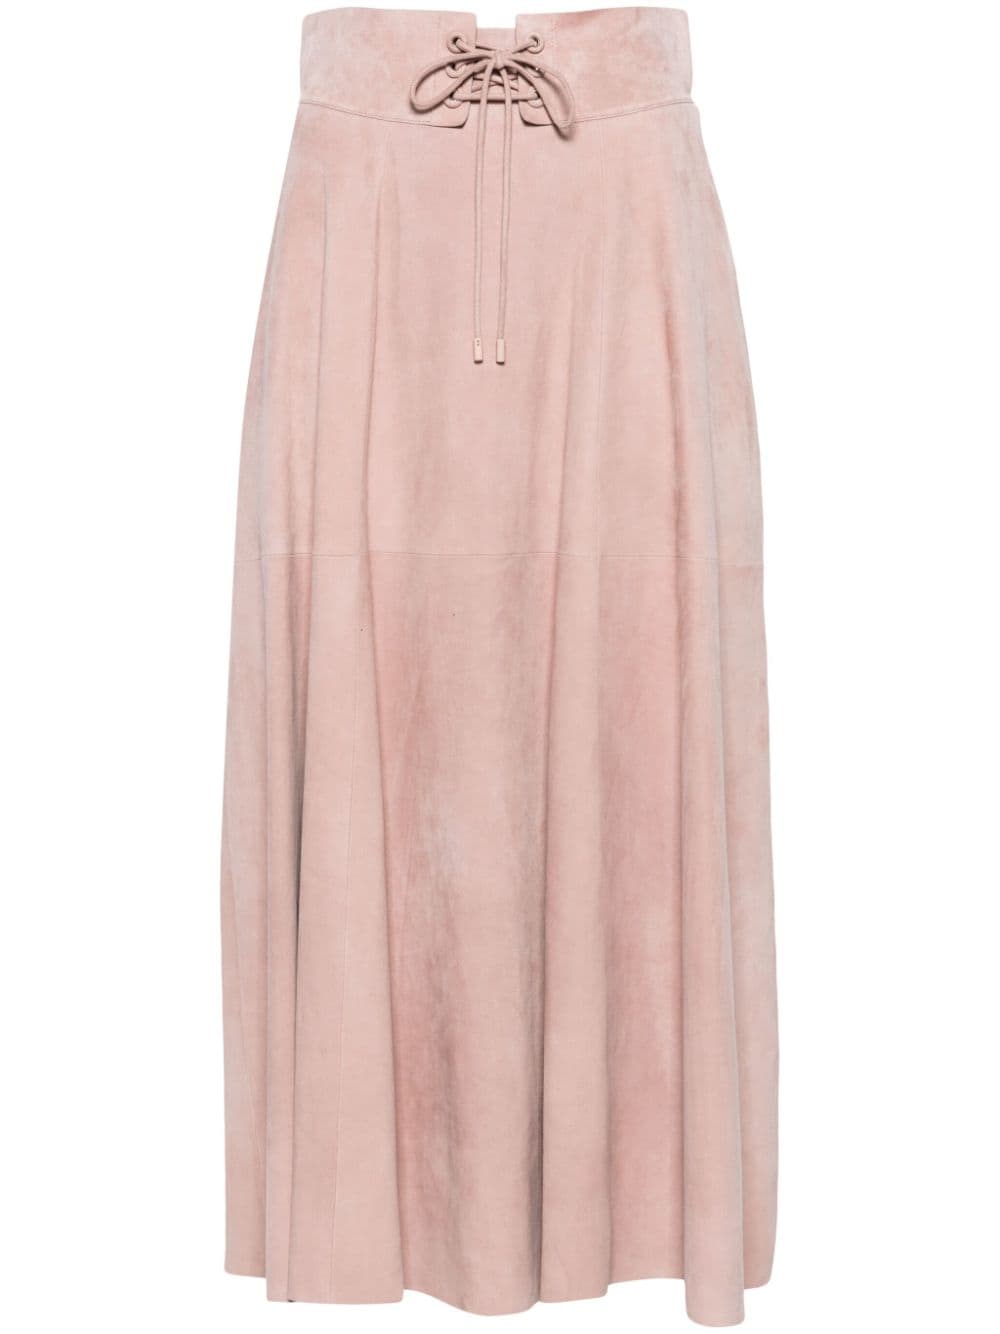 Ralph Lauren Lace-up Suede Midi Skirt In Pink